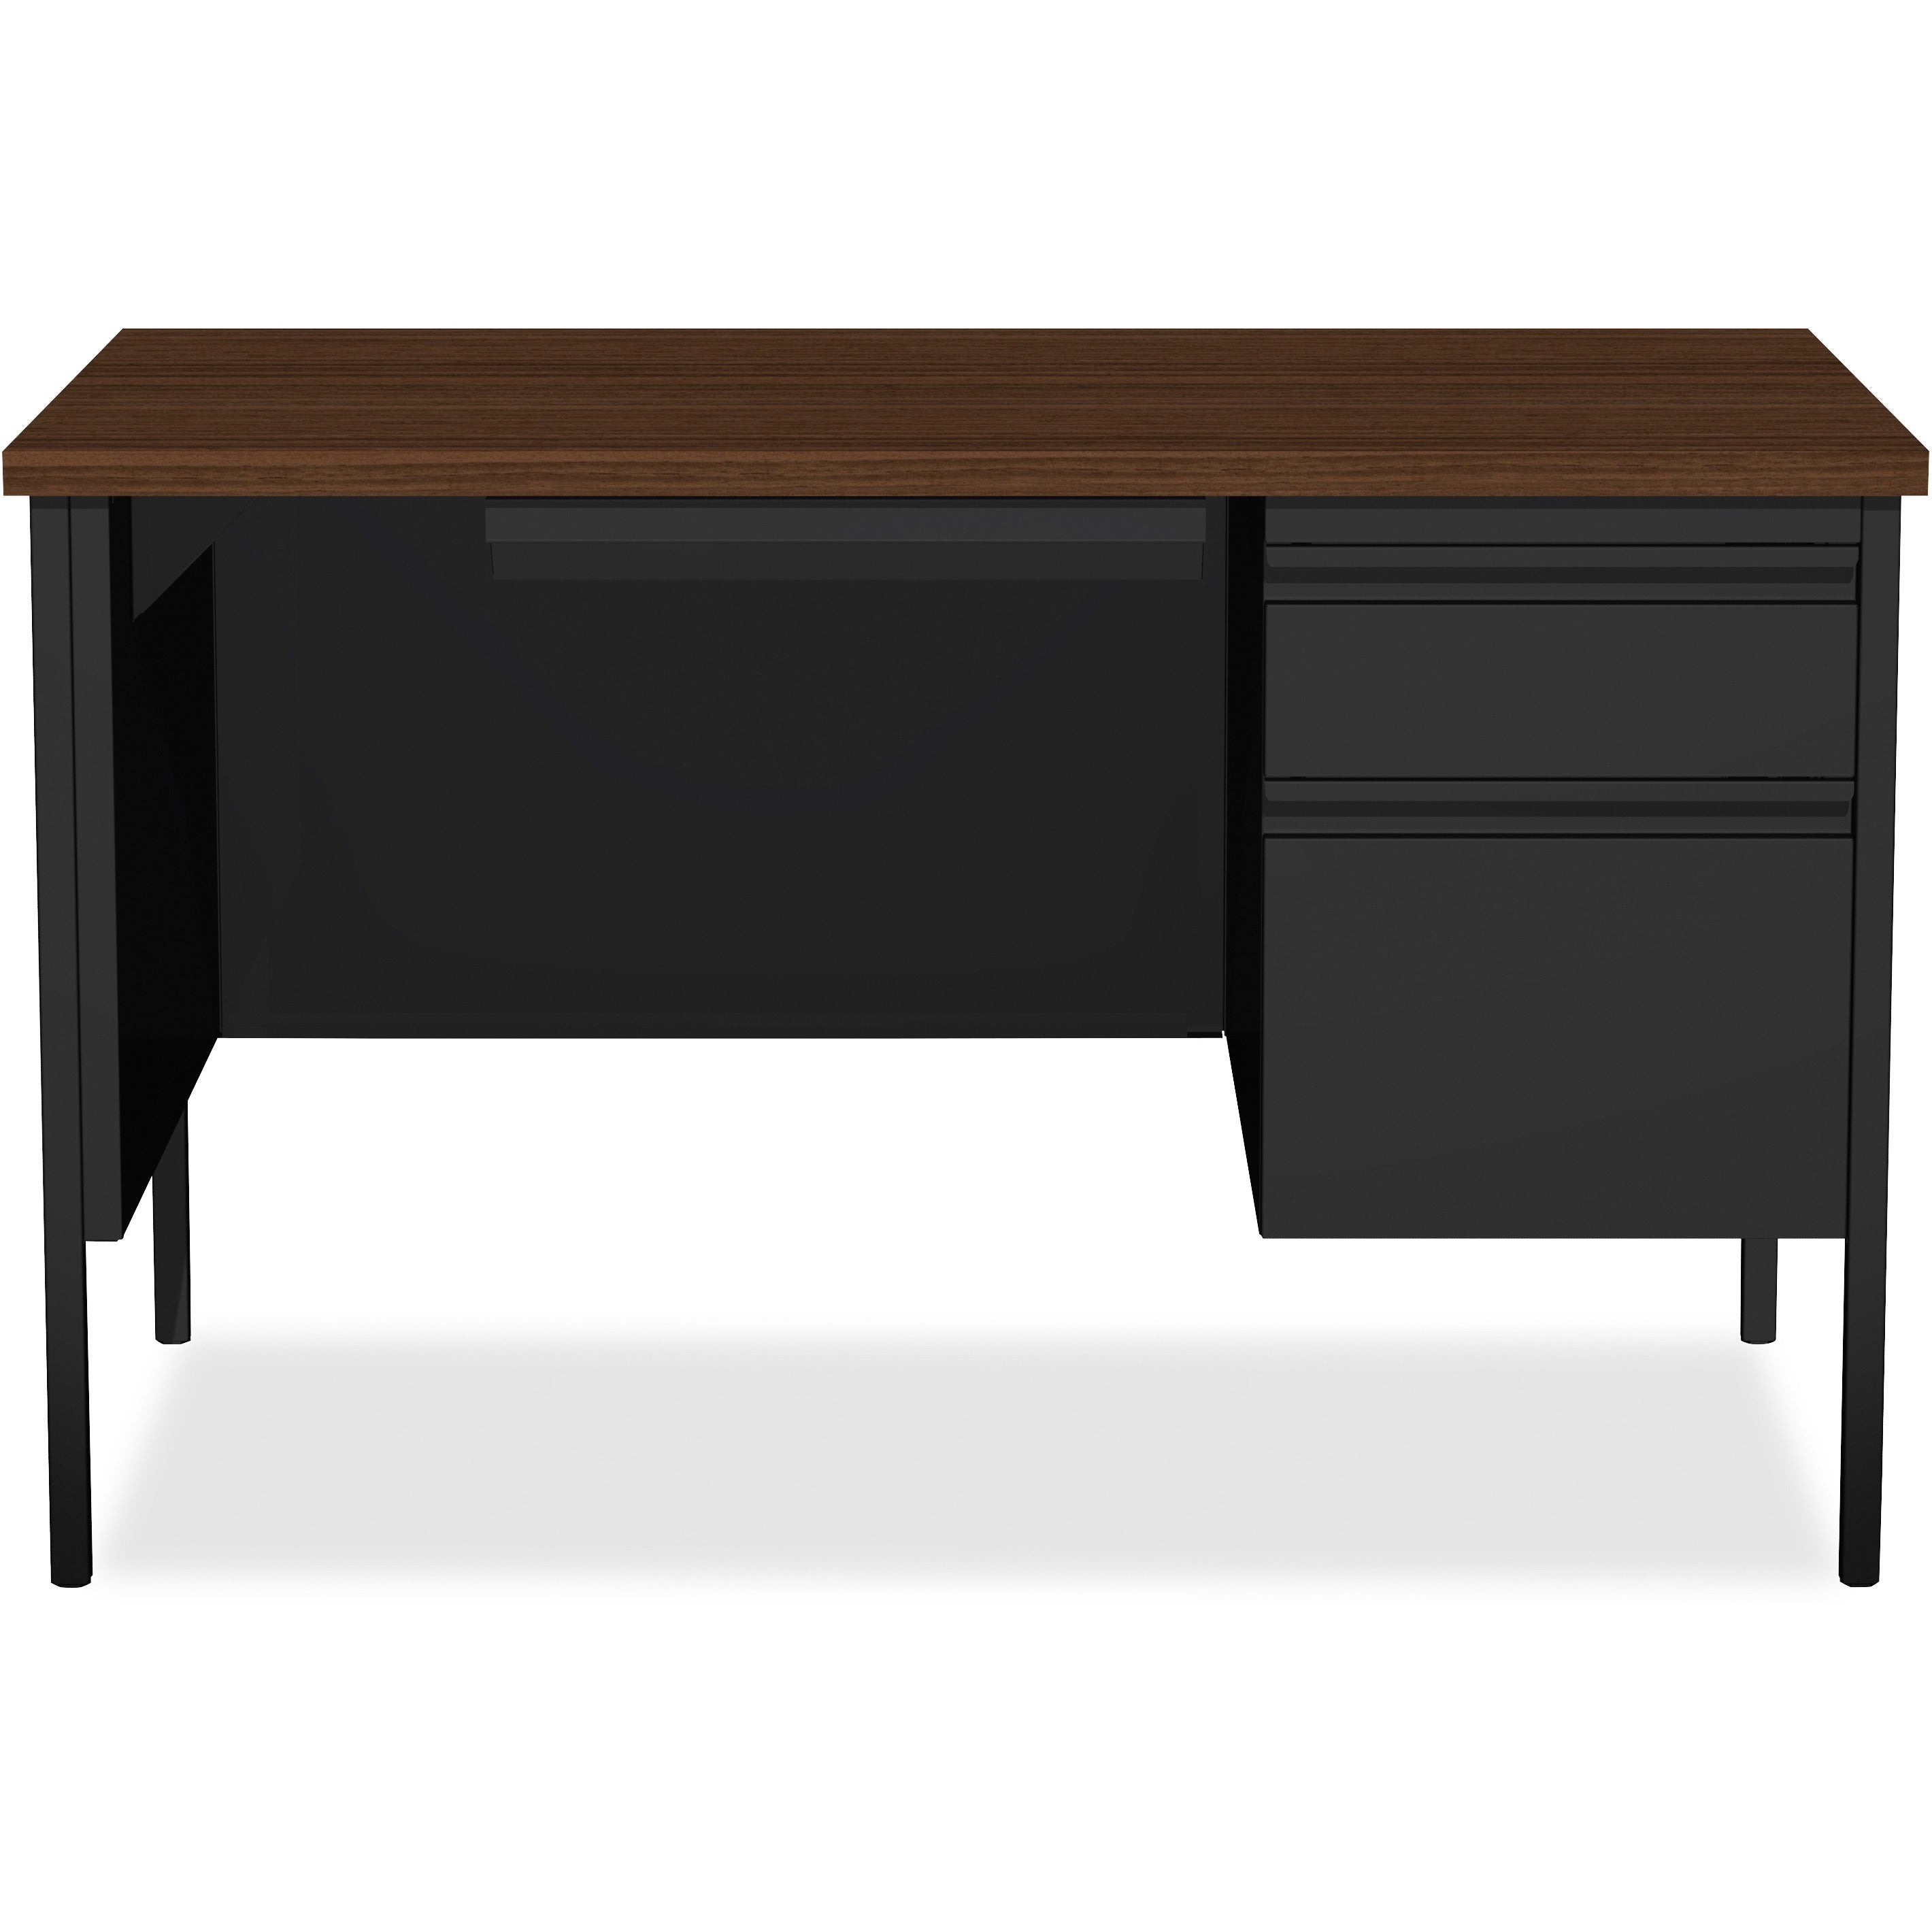 lorell-fortress-series-48-right-single-pedestal-desk-for-table-toplaminated-rectangle-walnut-top-30-table-top-length-x-48-table-top-width-x-113-table-top-thickness-2950-height-assembly-required-black-walnut-steel-1-each_llr66902 - 2